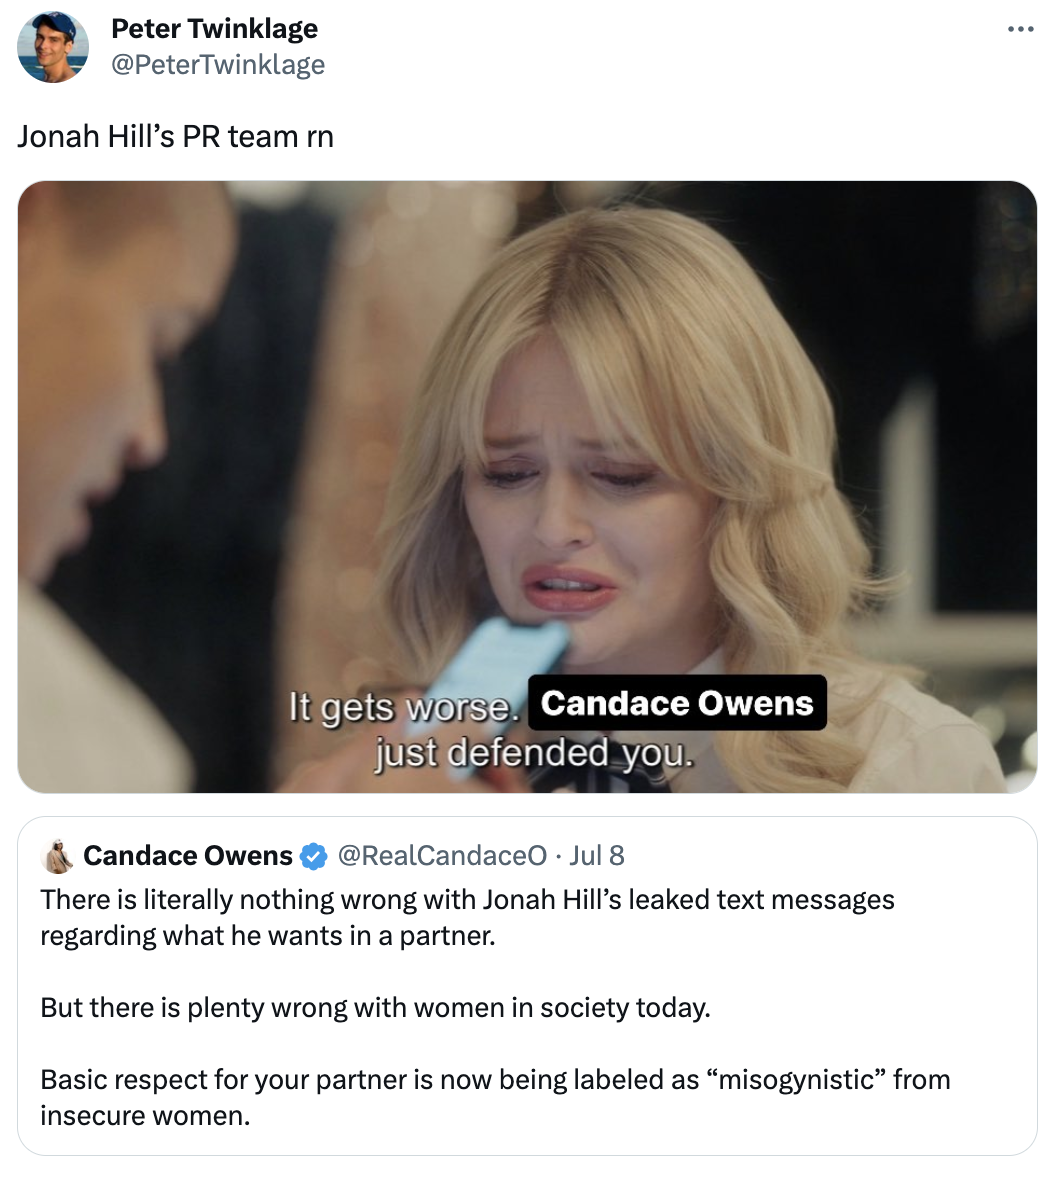 blond - Peter Twinklage Twinklage Jonah Hill's Pr team rn It gets worse. Candace Owens just defended you. Candace Owens Jul 8 There is literally nothing wrong with Jonah Hill's leaked text messages regarding what he wants in a partner. But there is plenty